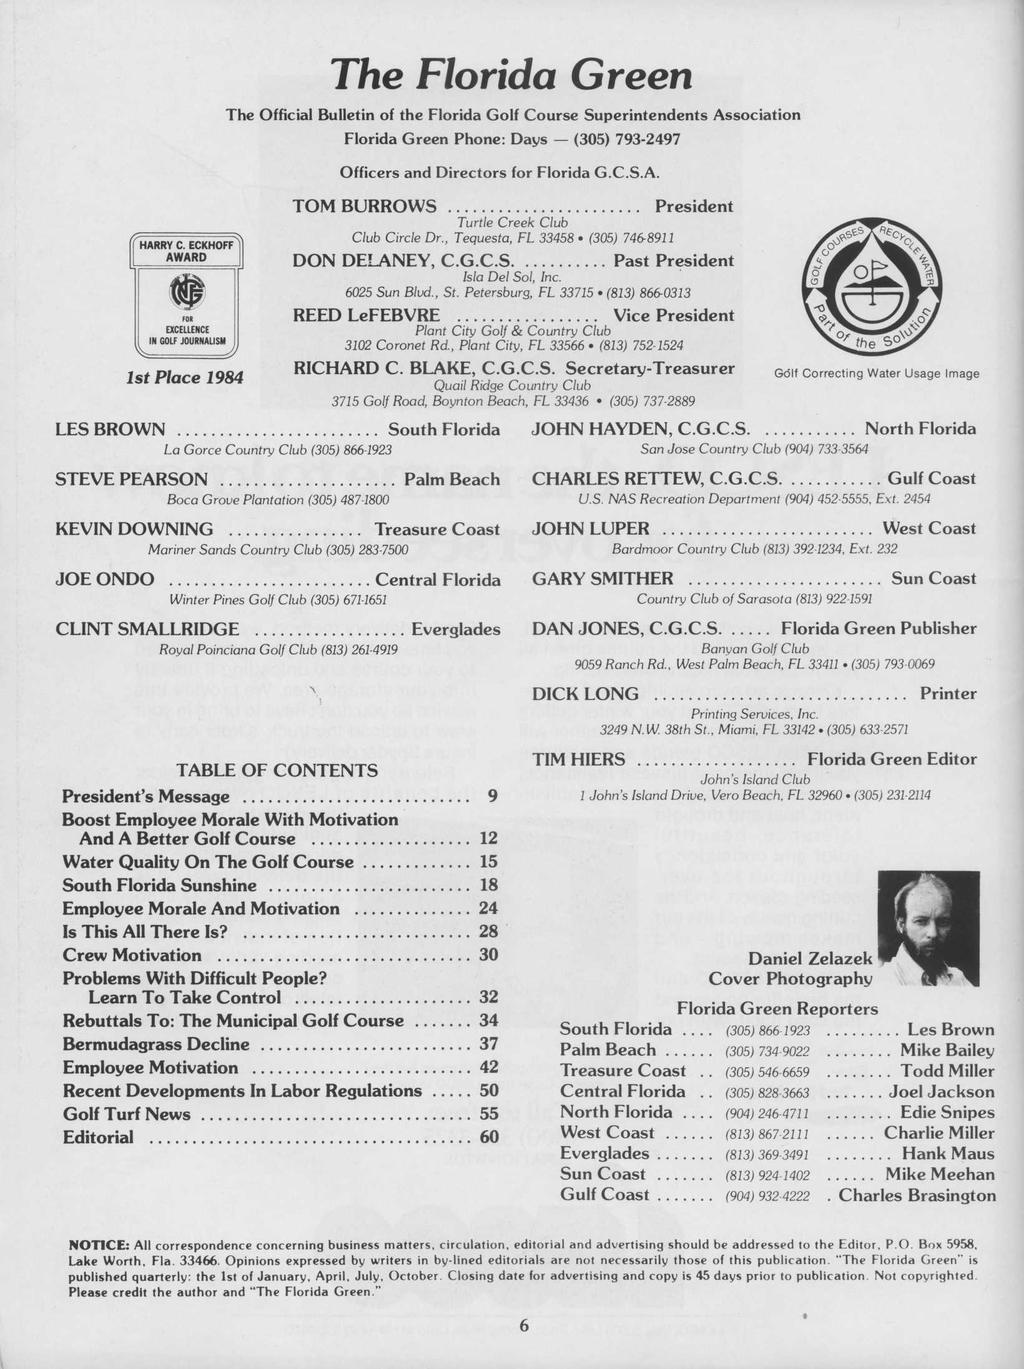 1st Place 1984 The Florida Green The Official Bulletin of the Florida Golf Course Superintendents Association Florida Green Phone: Days (305) 793-2497 Officers and Directors for Florida G.C.S.A. TOM BURROWS Turtle Creek Club Club Circle Dr.